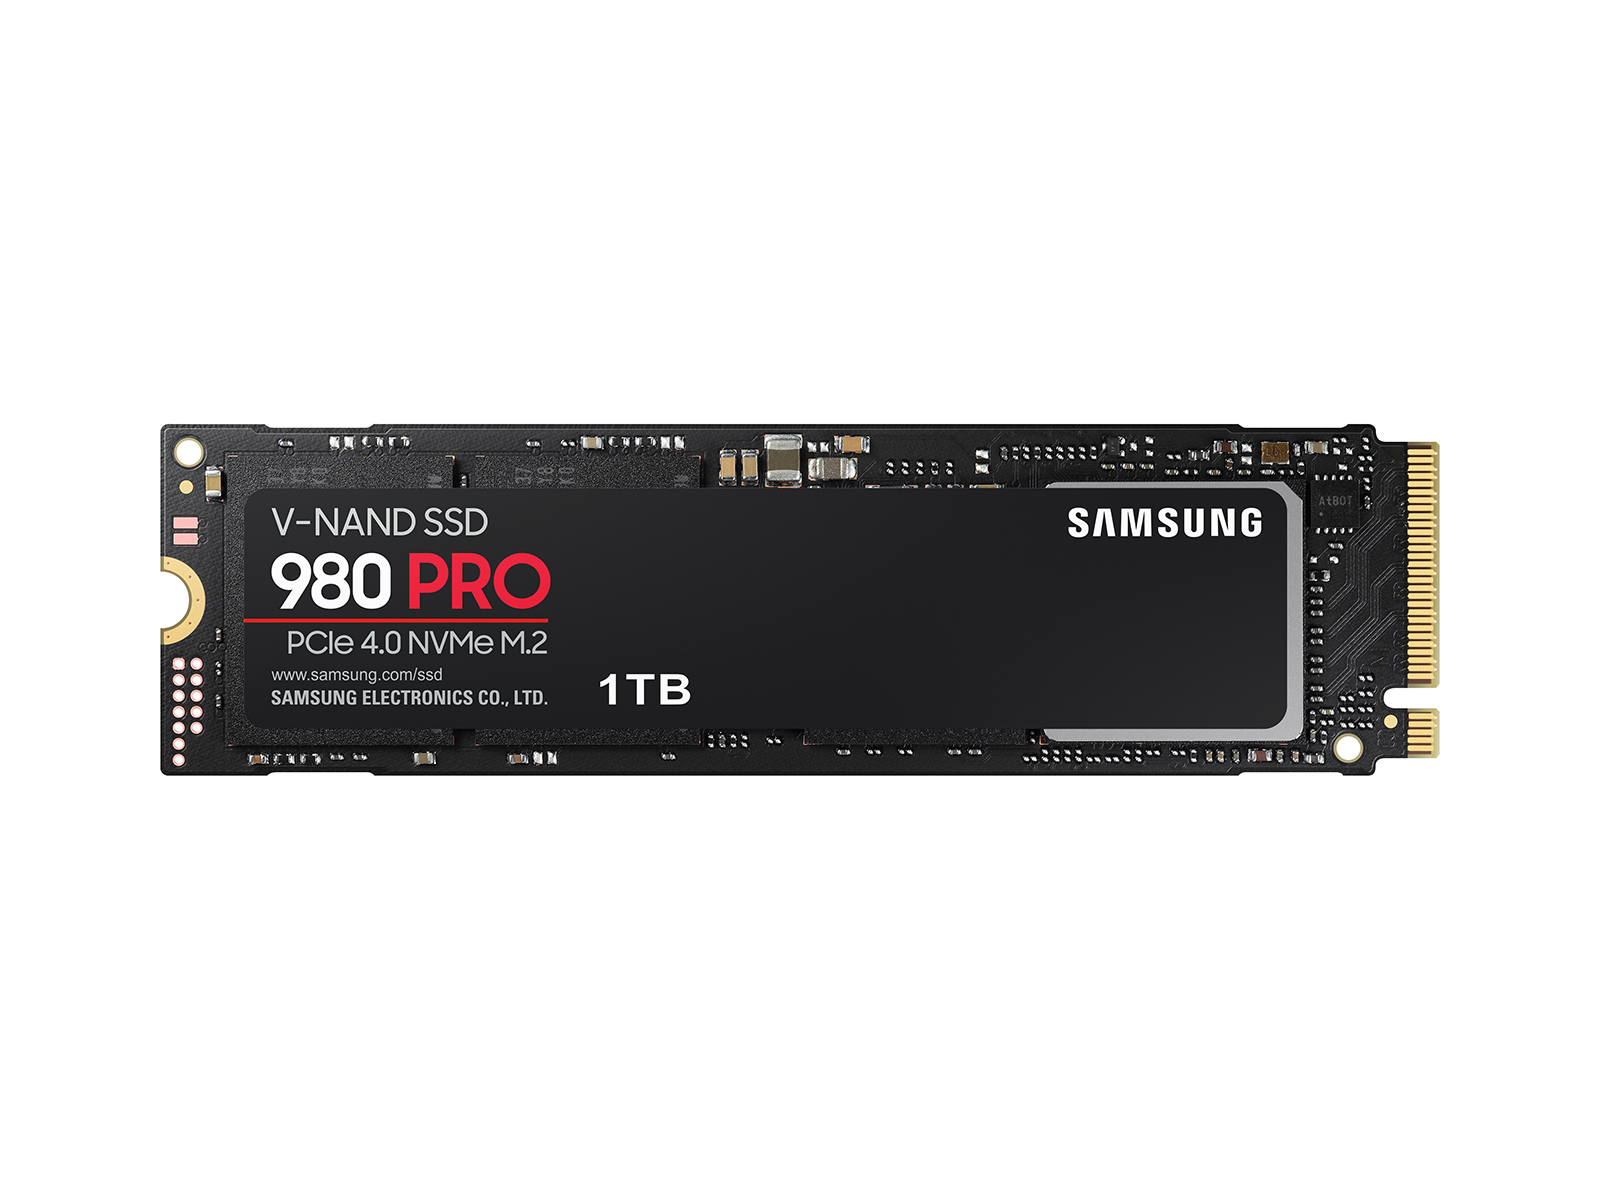 YMMV 980 PRO PCIe 4.0 NVMe SSD 1TB. Samsung Discount Program + Email Hype Promo Code $162.24